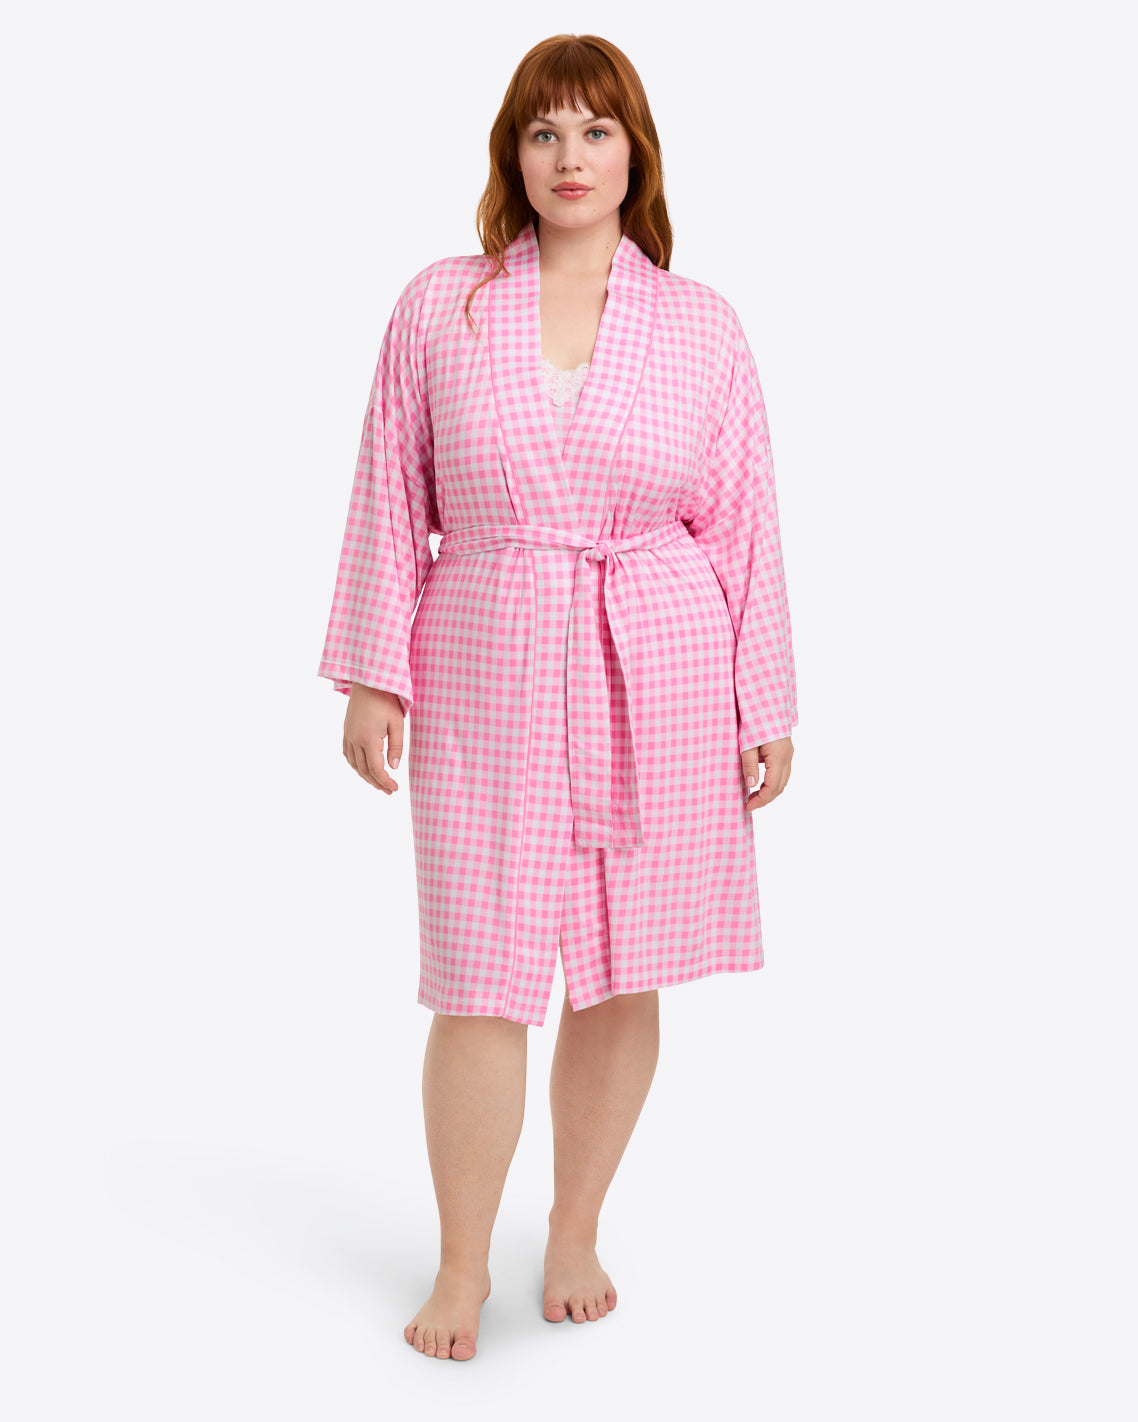 Louise Robe in Light Pink Gingham